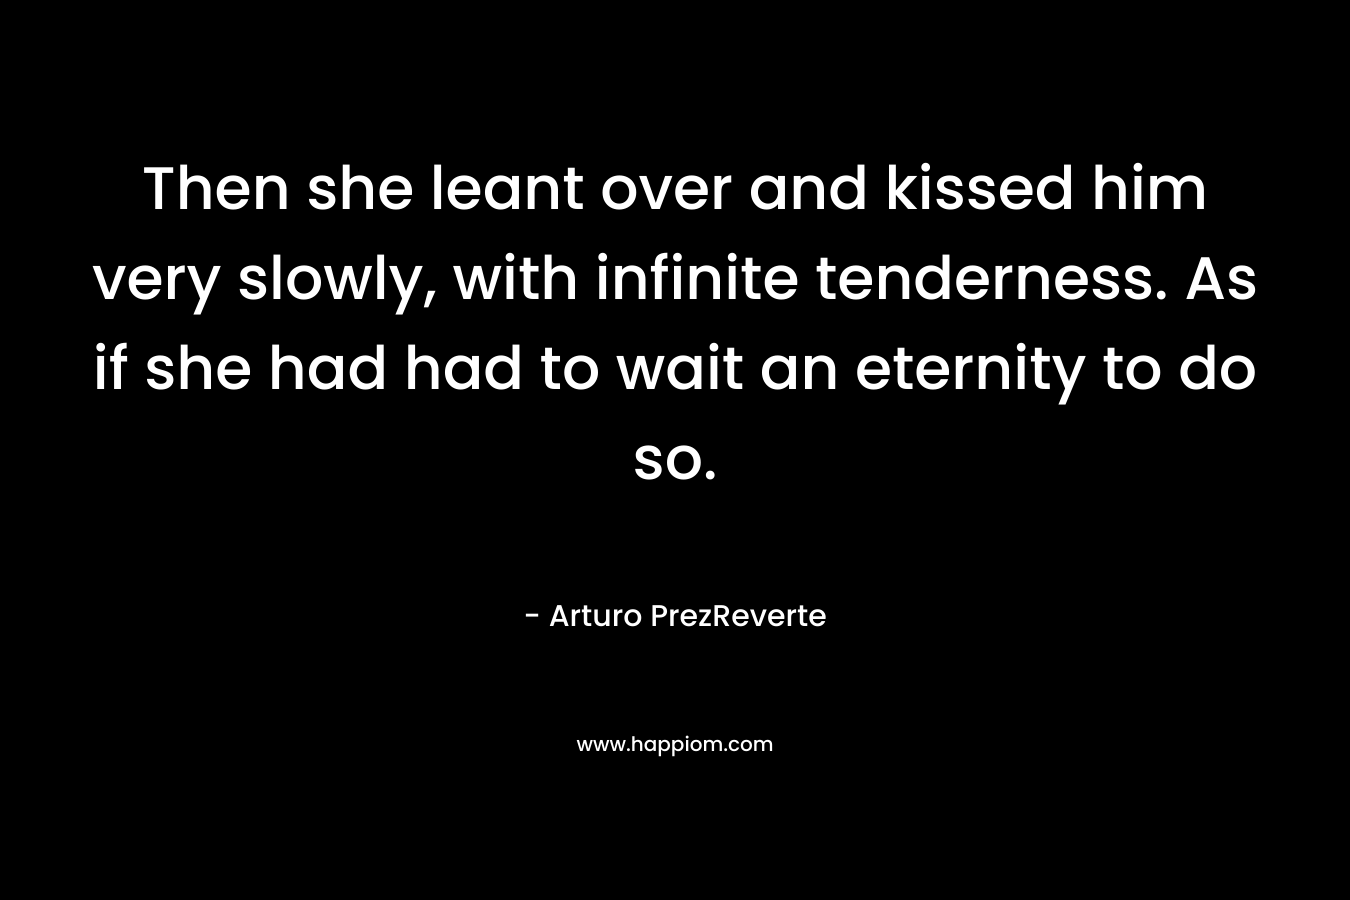 Then she leant over and kissed him very slowly, with infinite tenderness. As if she had had to wait an eternity to do so. – Arturo PrezReverte